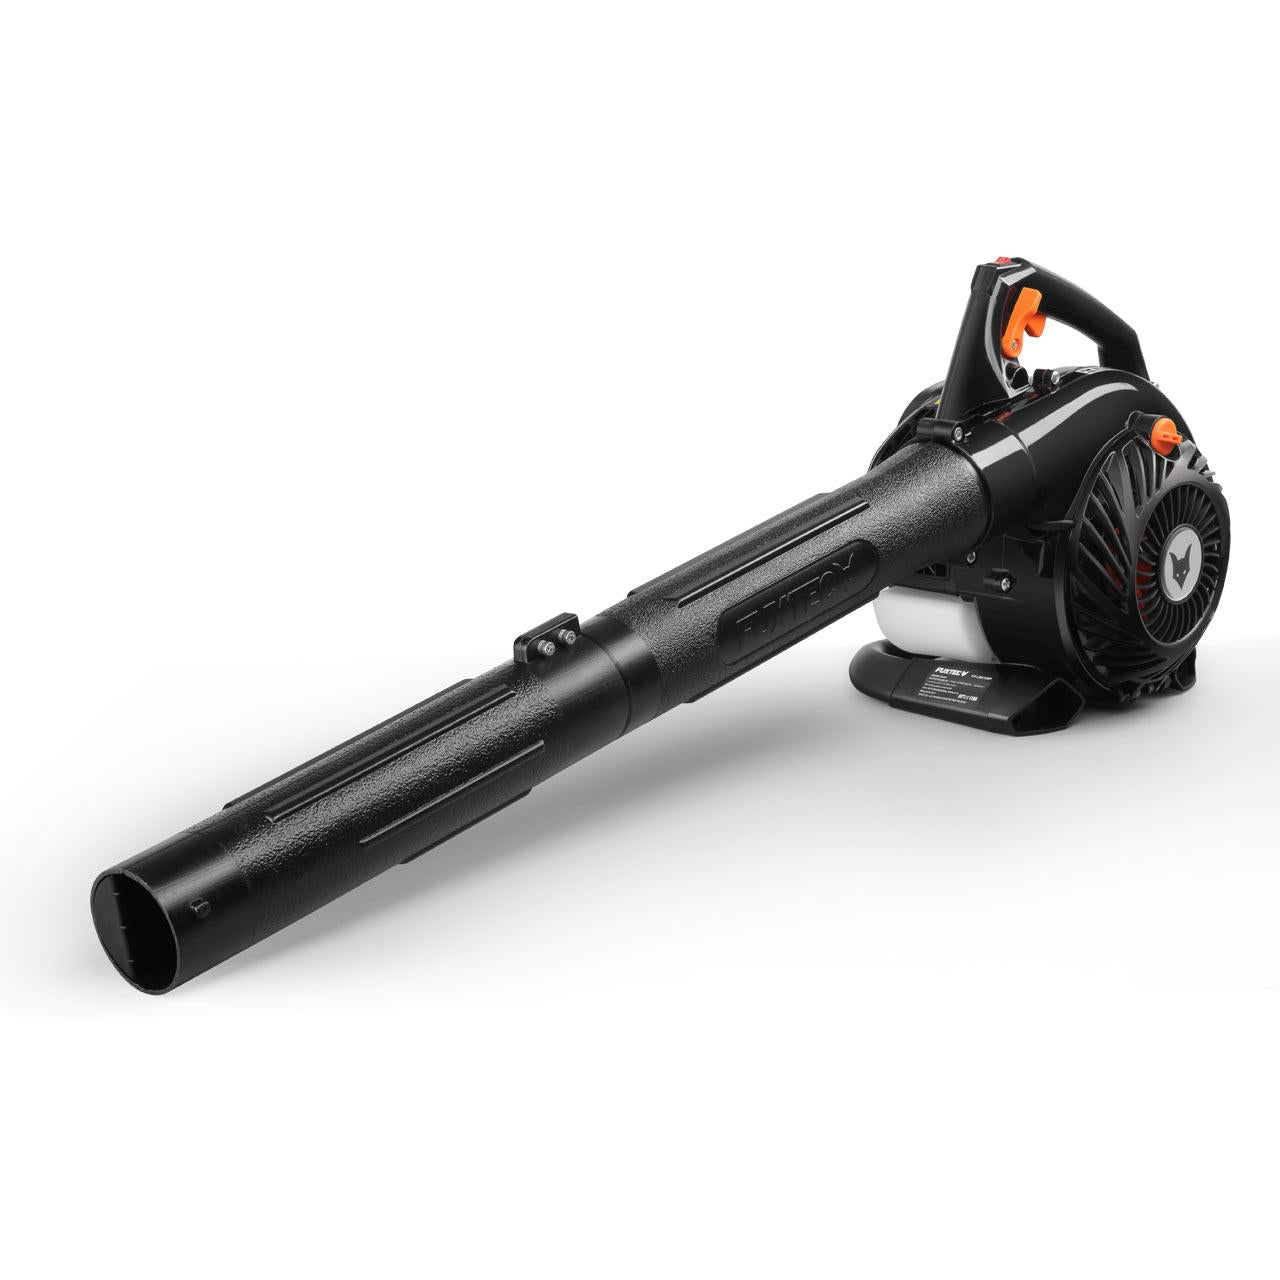 Petrol leaf blower 25.4cc 3in1 blowing-vacuum-shredder-function + collection bag FUXTEC LBS126P